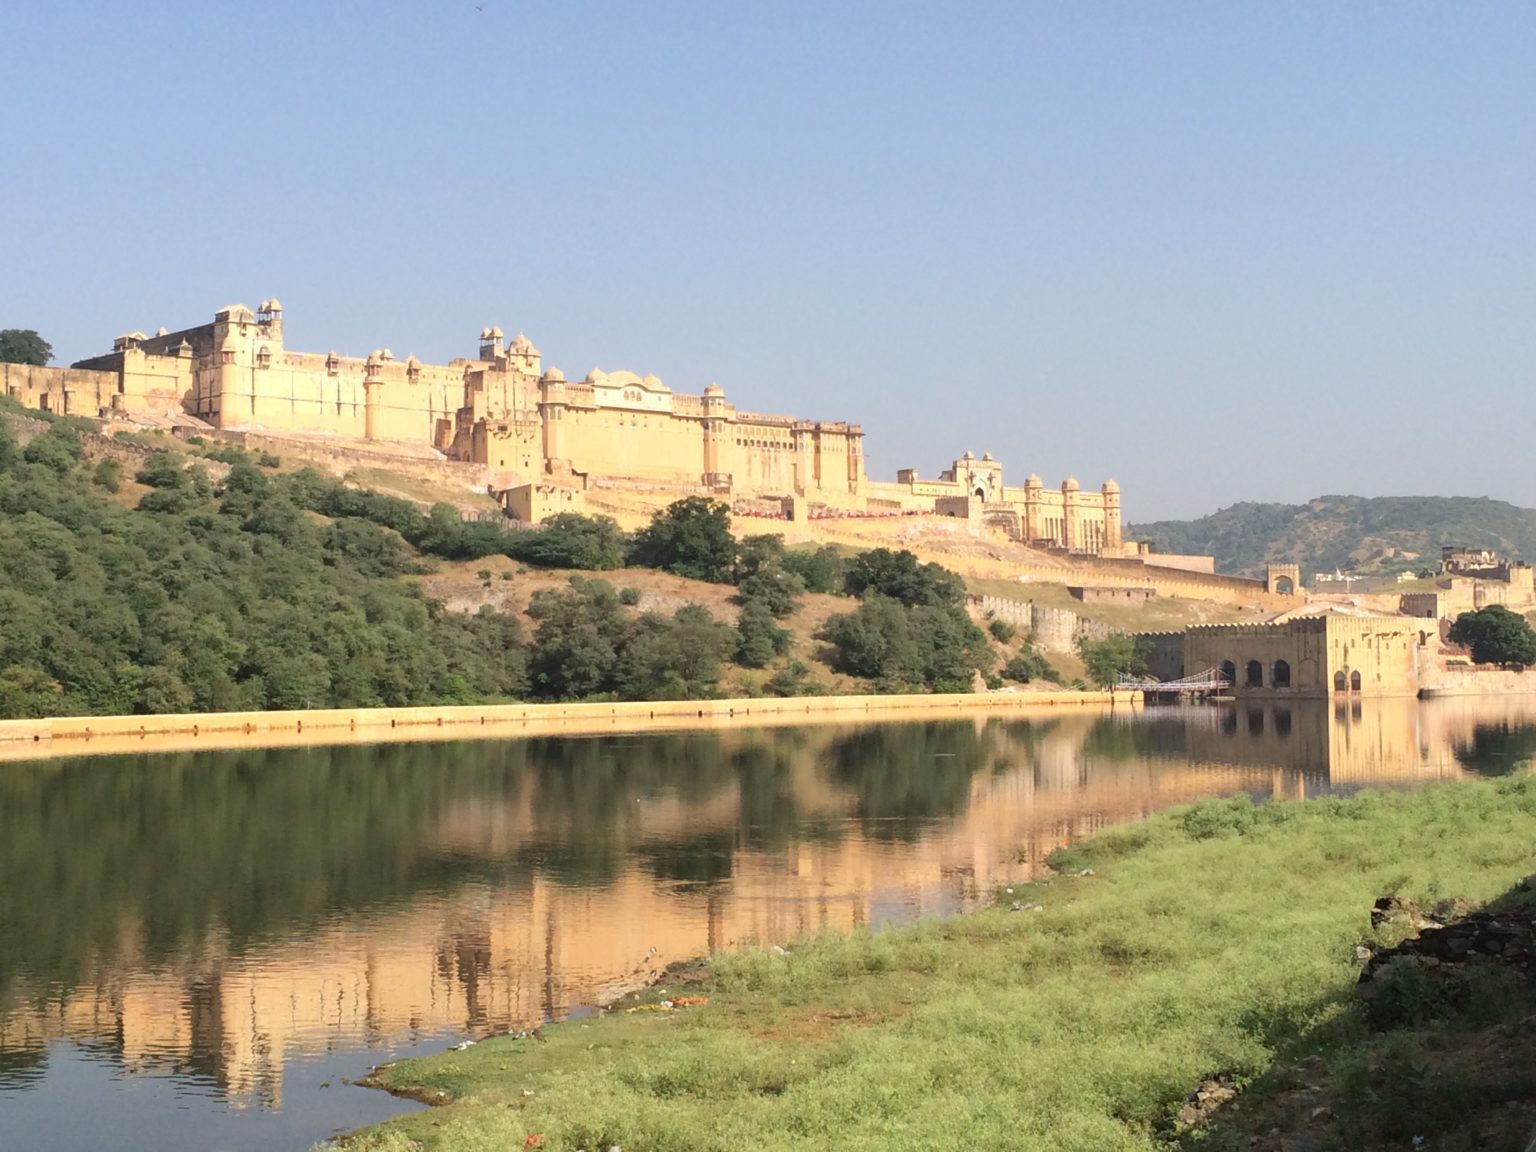 Amber Fort seen from a distance over some grass and a river.